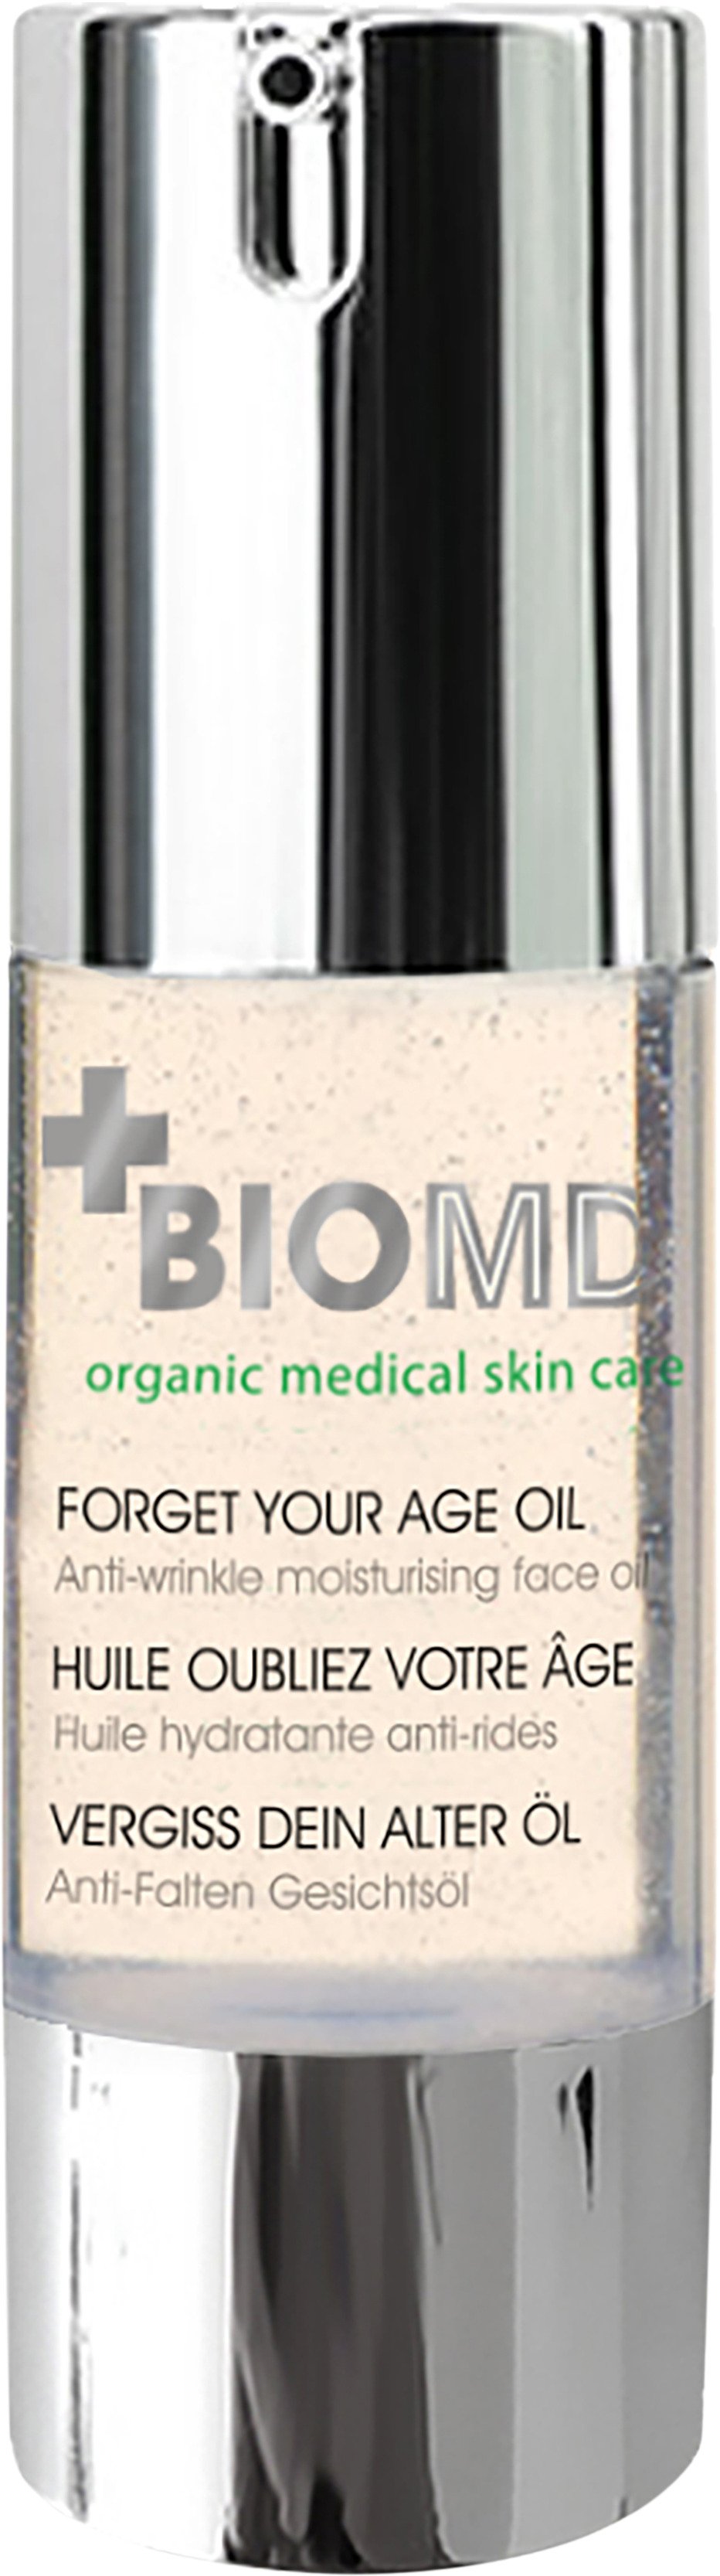 BioMD Forget Your Age Oil 30 ml